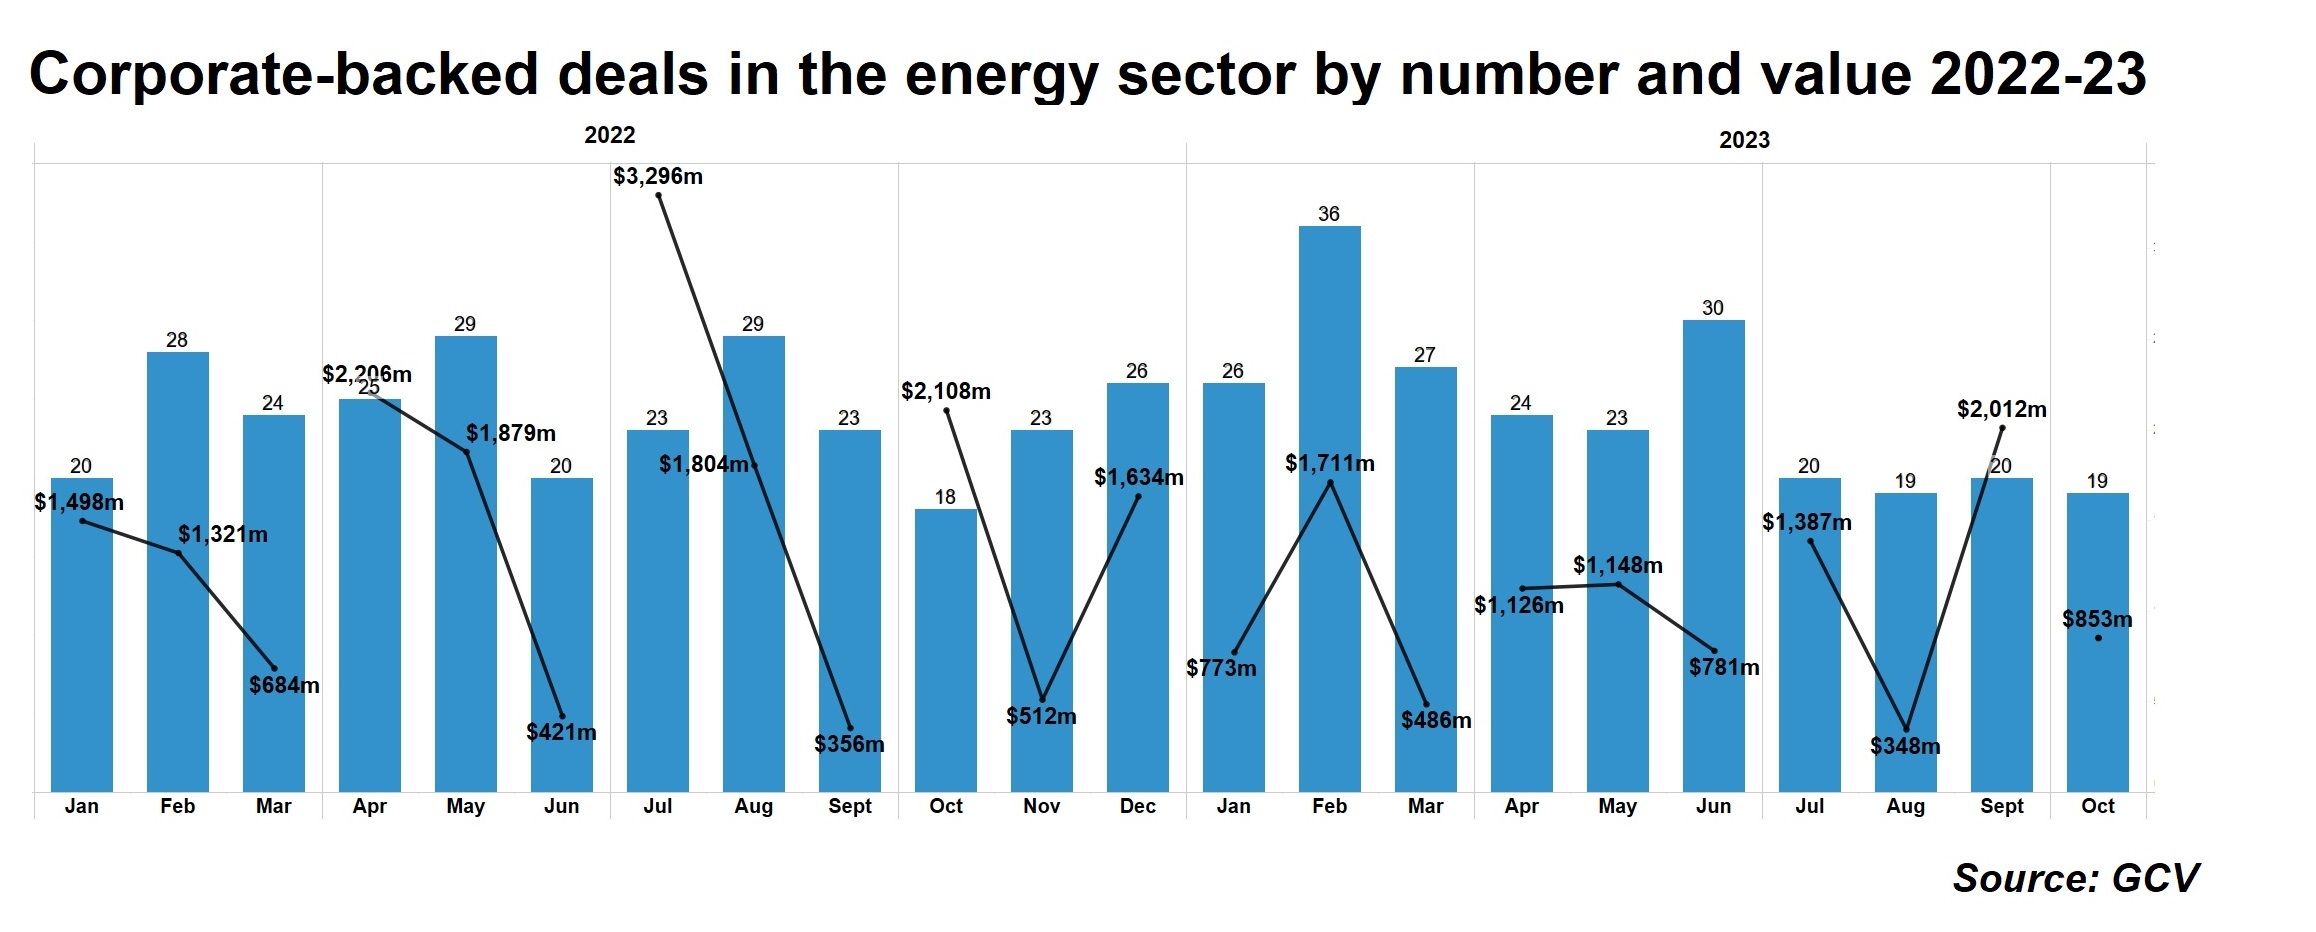 corporate-backed deals in the energy sector by number and value 2022-23